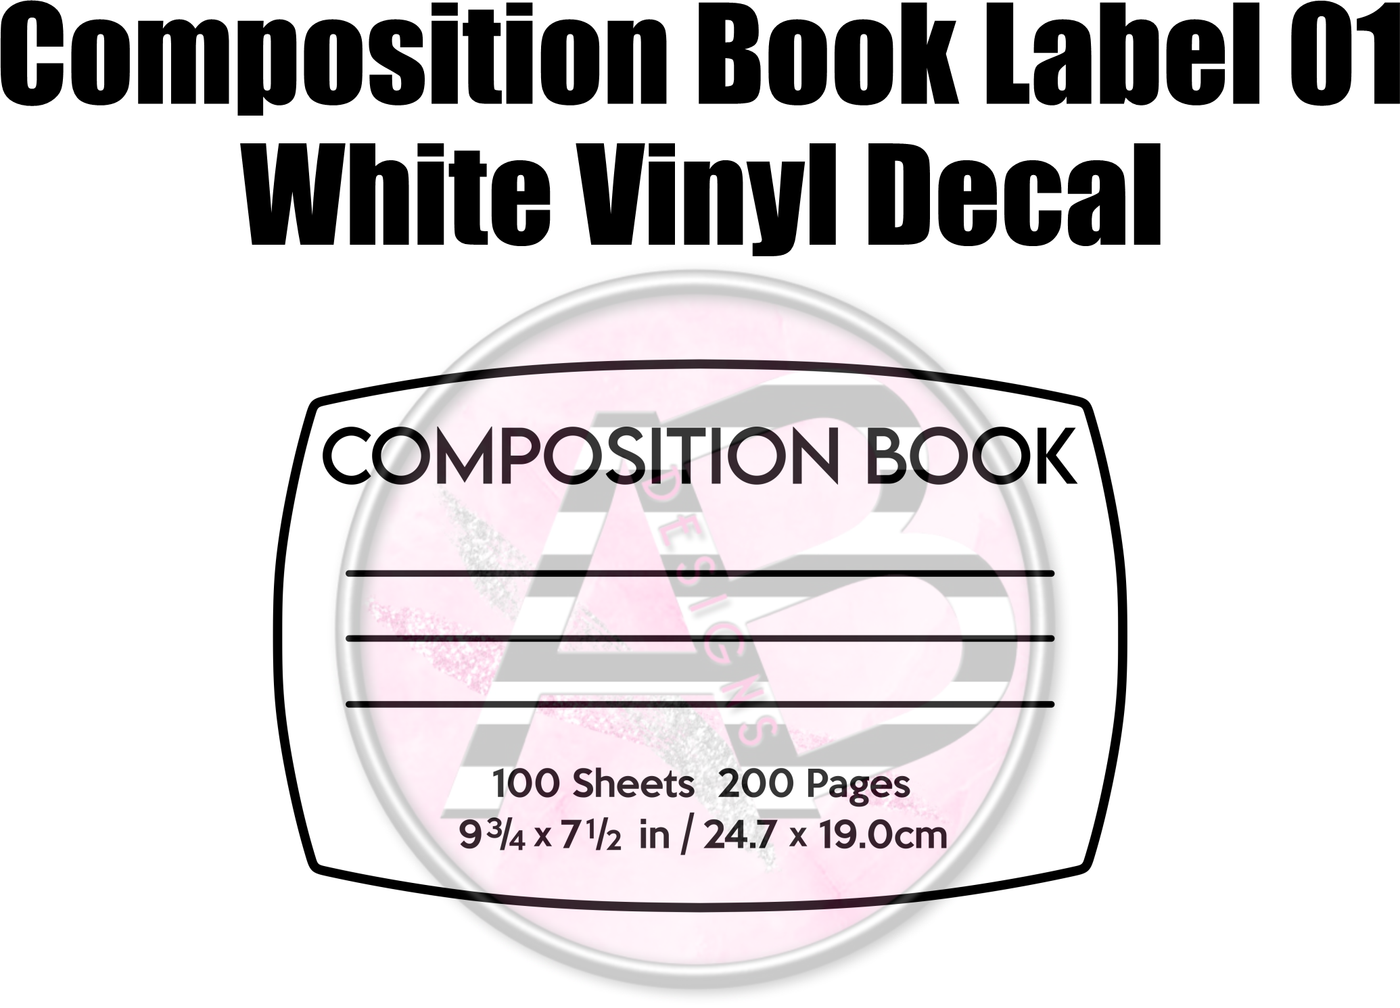 Composition Book Label 1 - White Vinyl Decal